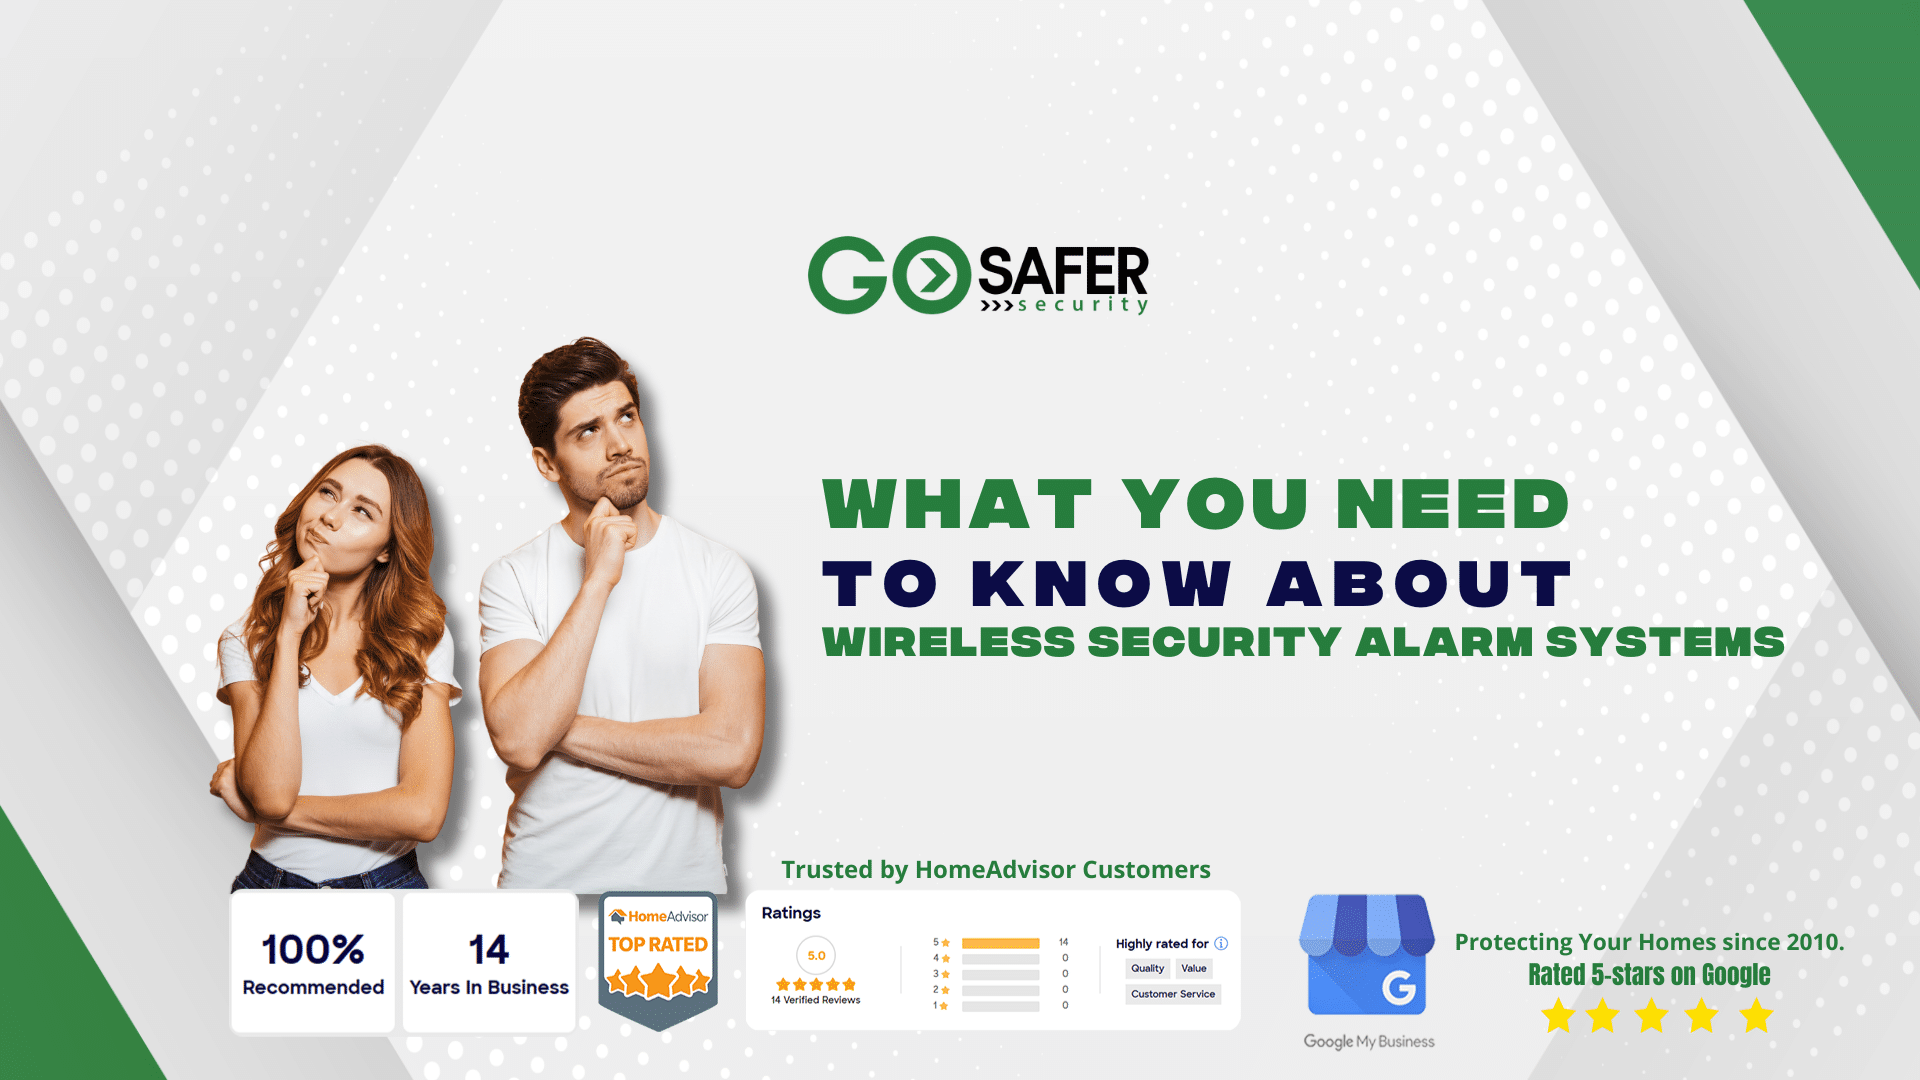 What You Need to Know About Wireless Security Alarm Systems